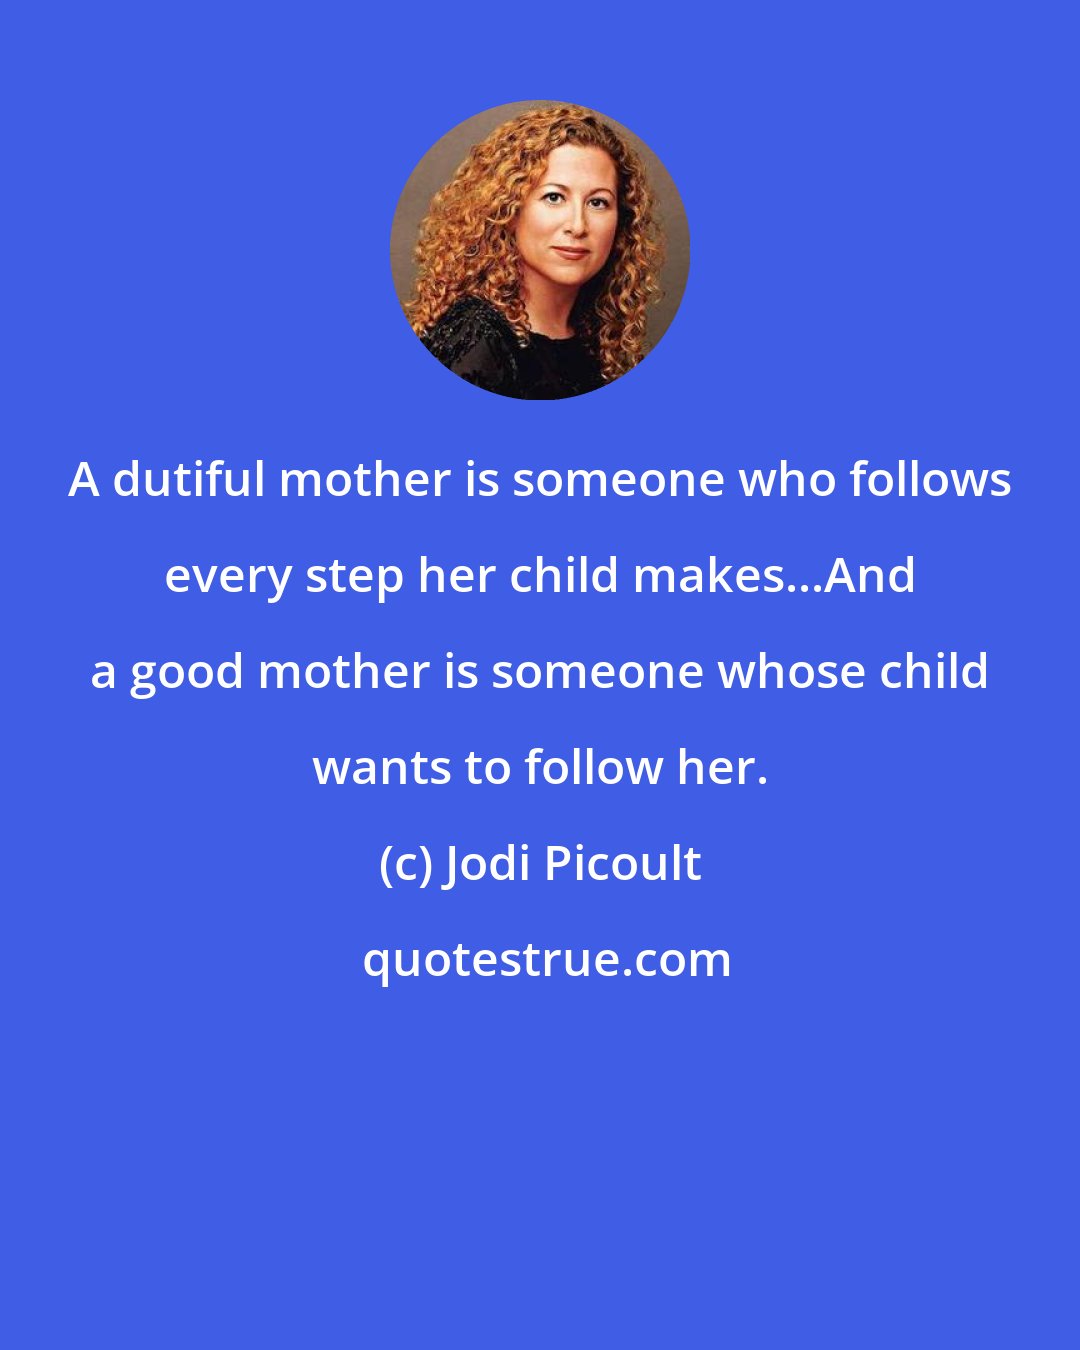 Jodi Picoult: A dutiful mother is someone who follows every step her child makes...And a good mother is someone whose child wants to follow her.